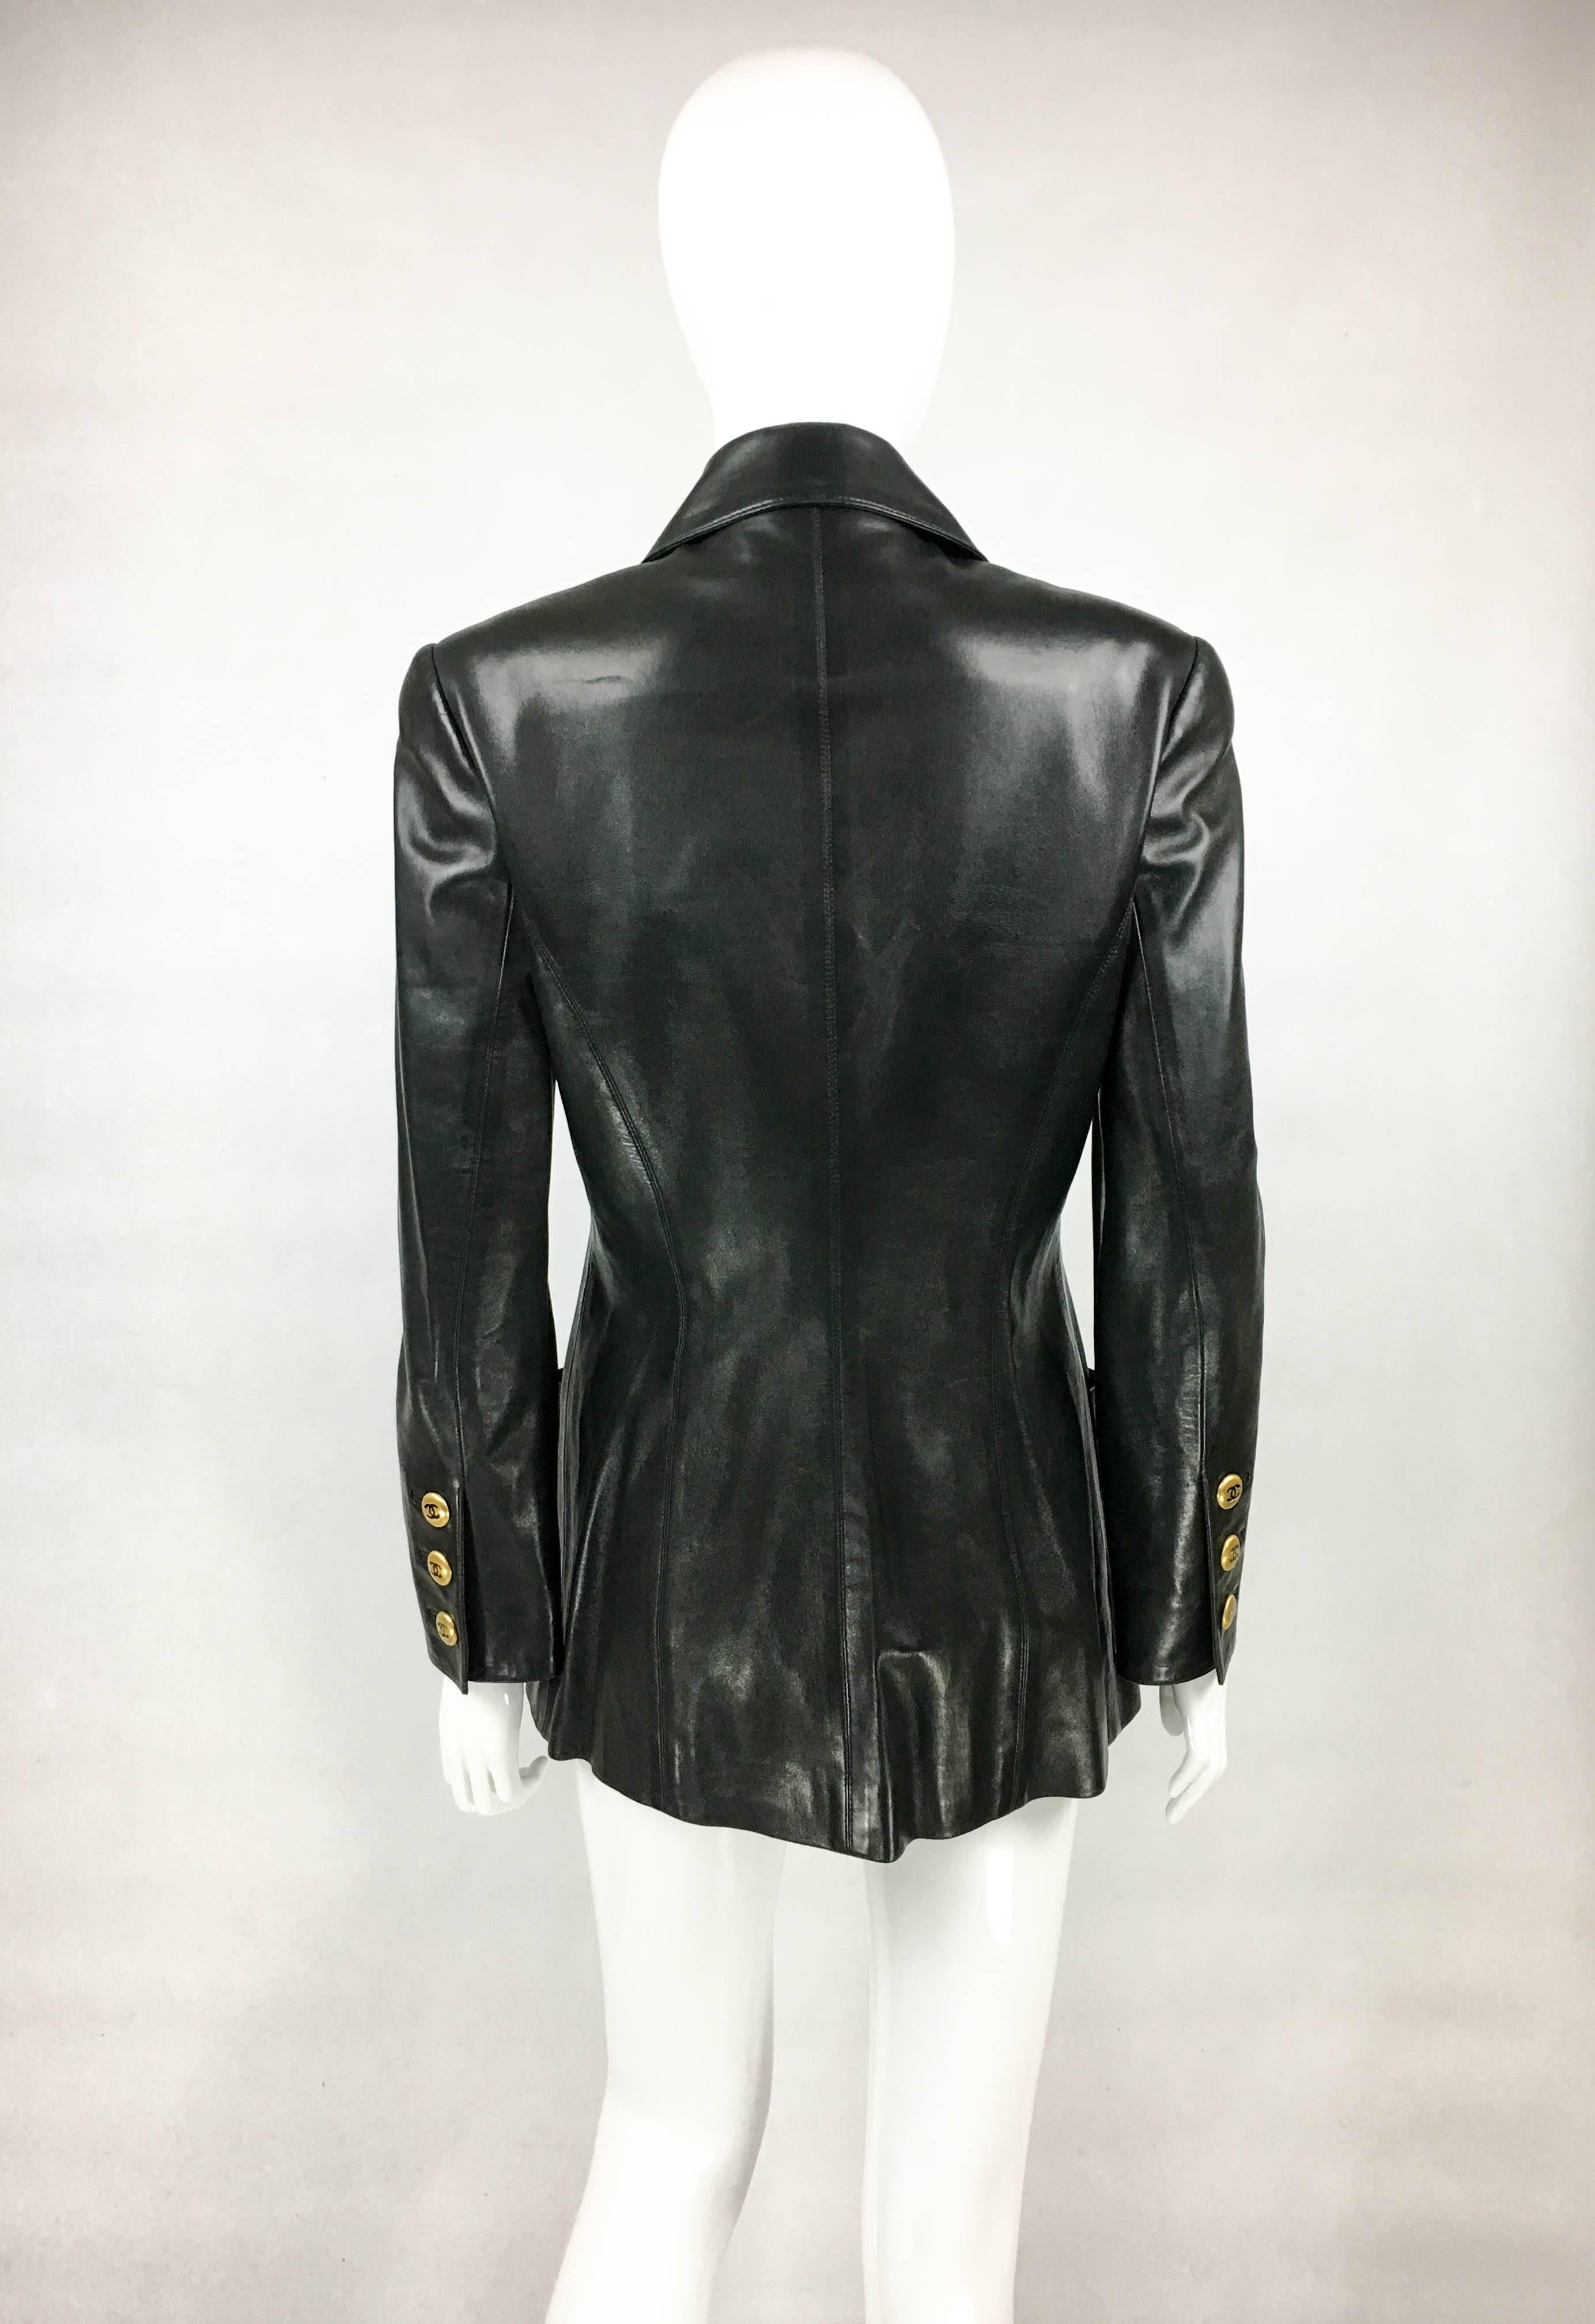 1992 Chanel Runway Look Black Leather Jacket With Quilted Shoulder 2